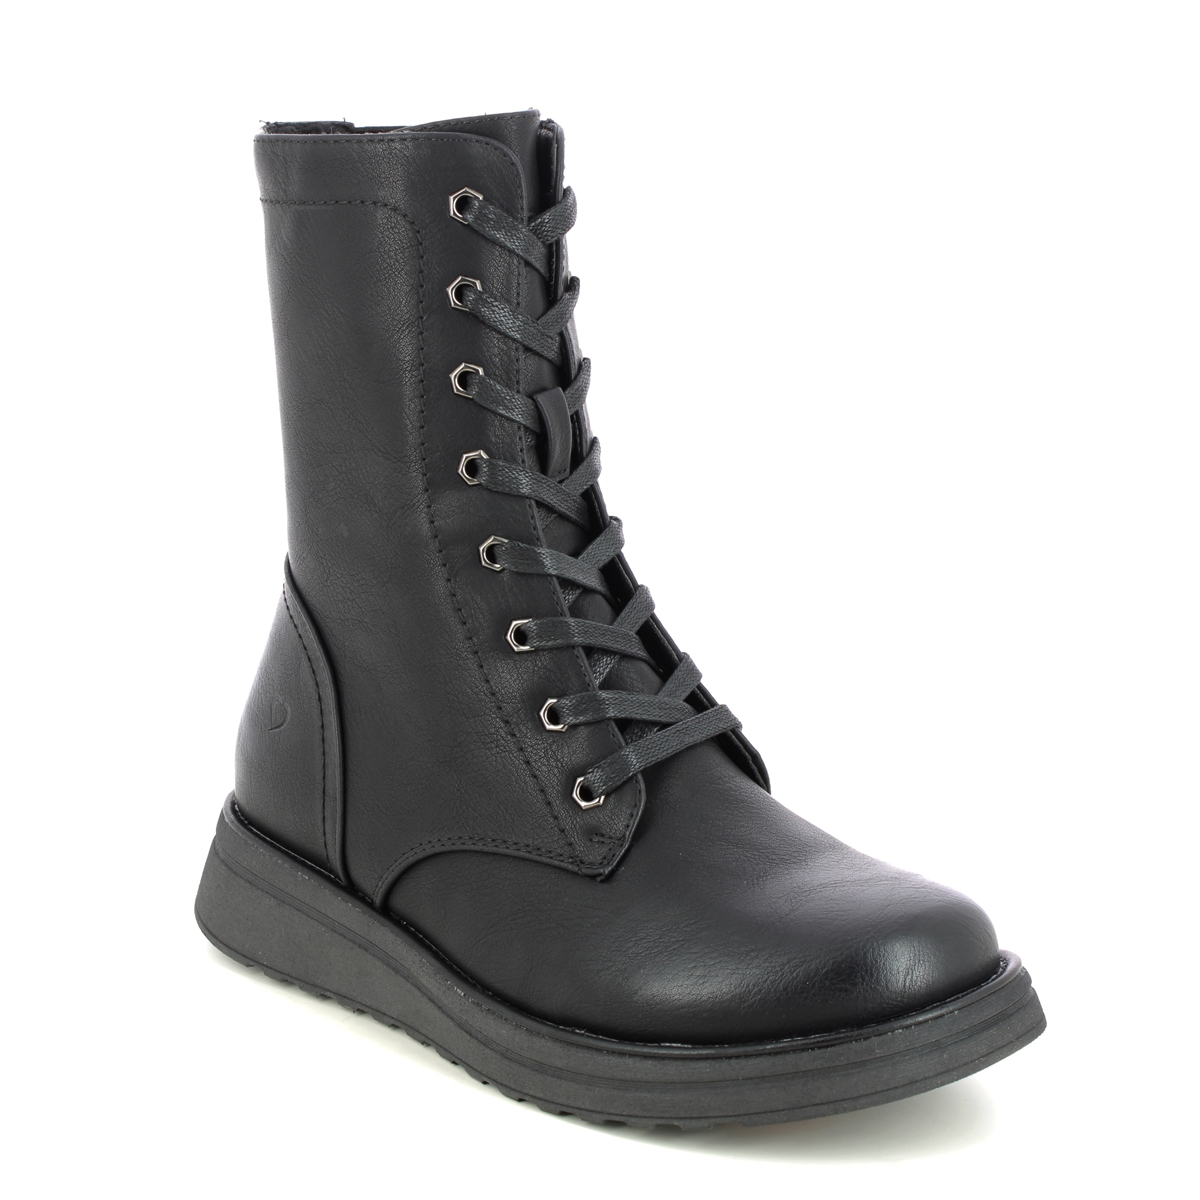 Heavenly Feet Martina Walker Black Womens Lace Up Boots 3509-34 In Size 8 In Plain Black